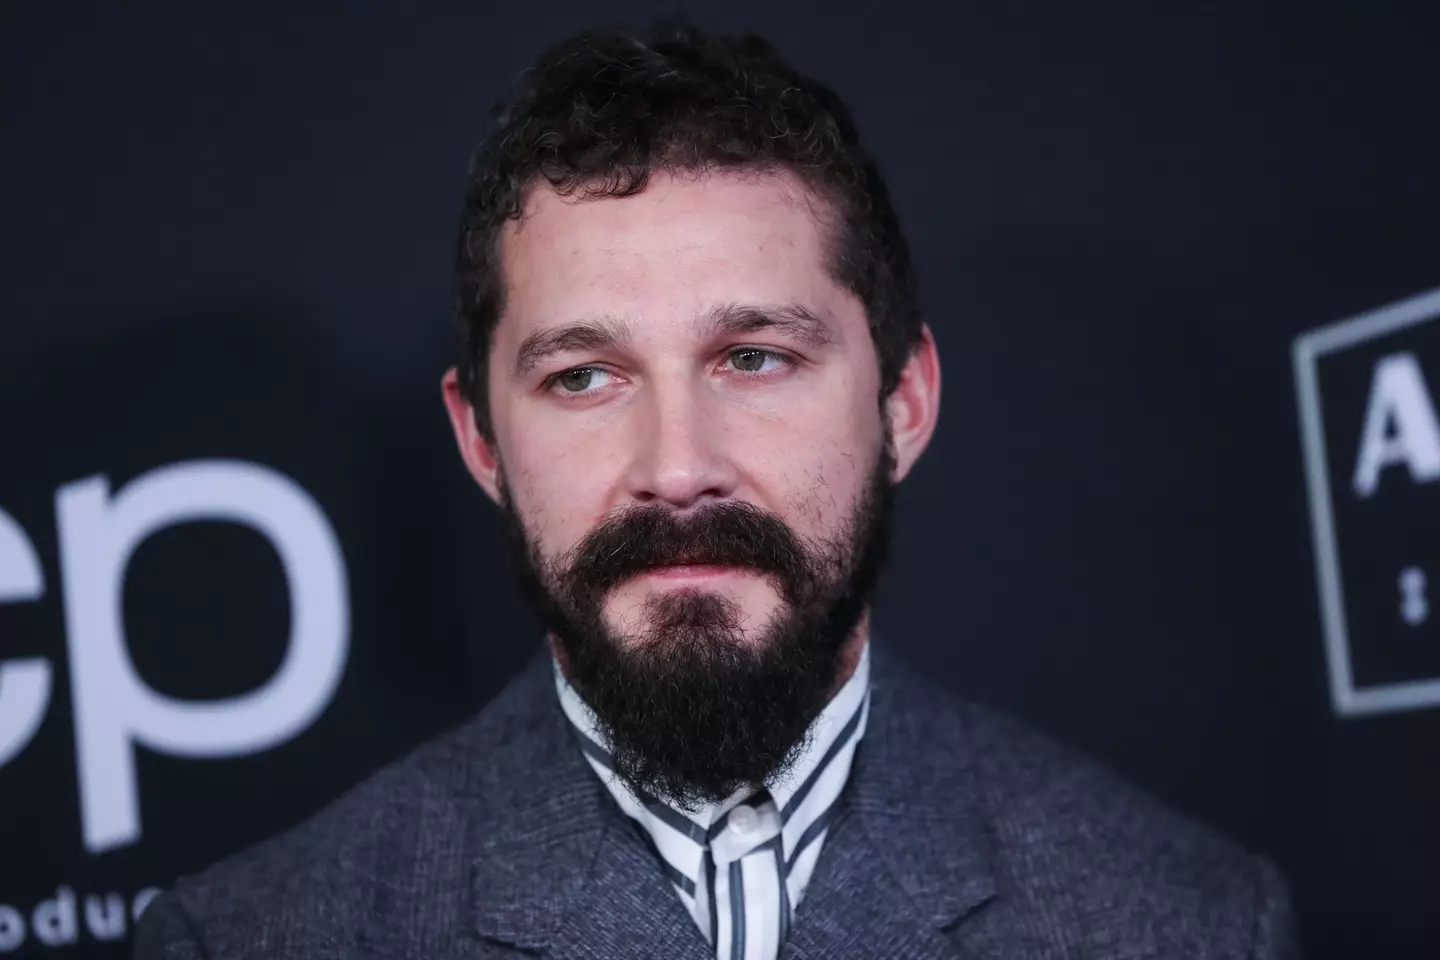 Shia LaBeouf has been accused of controlling behaviour and physical violence towards his ex-partner.